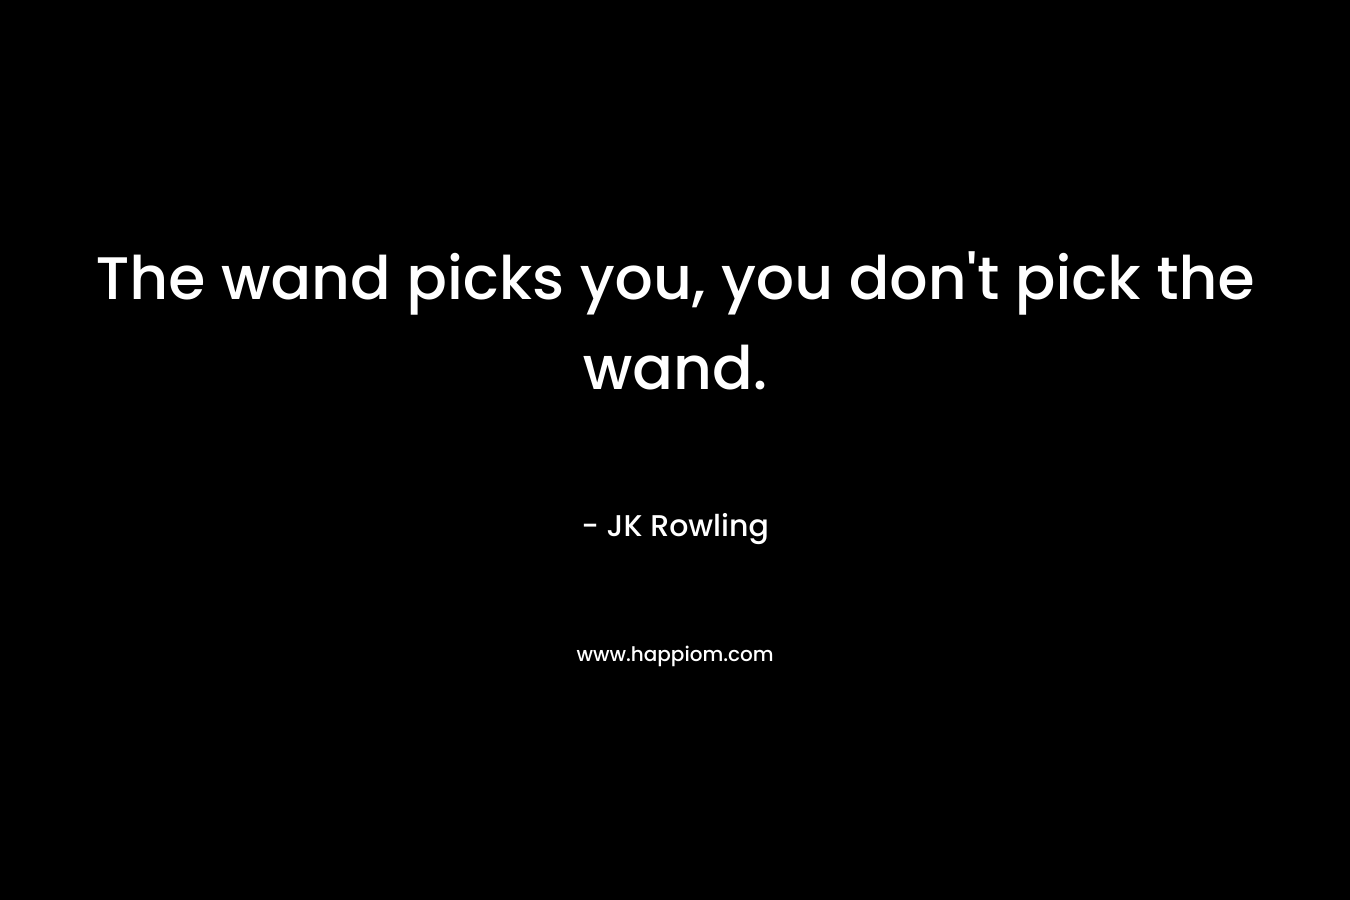 The wand picks you, you don’t pick the wand. – JK Rowling